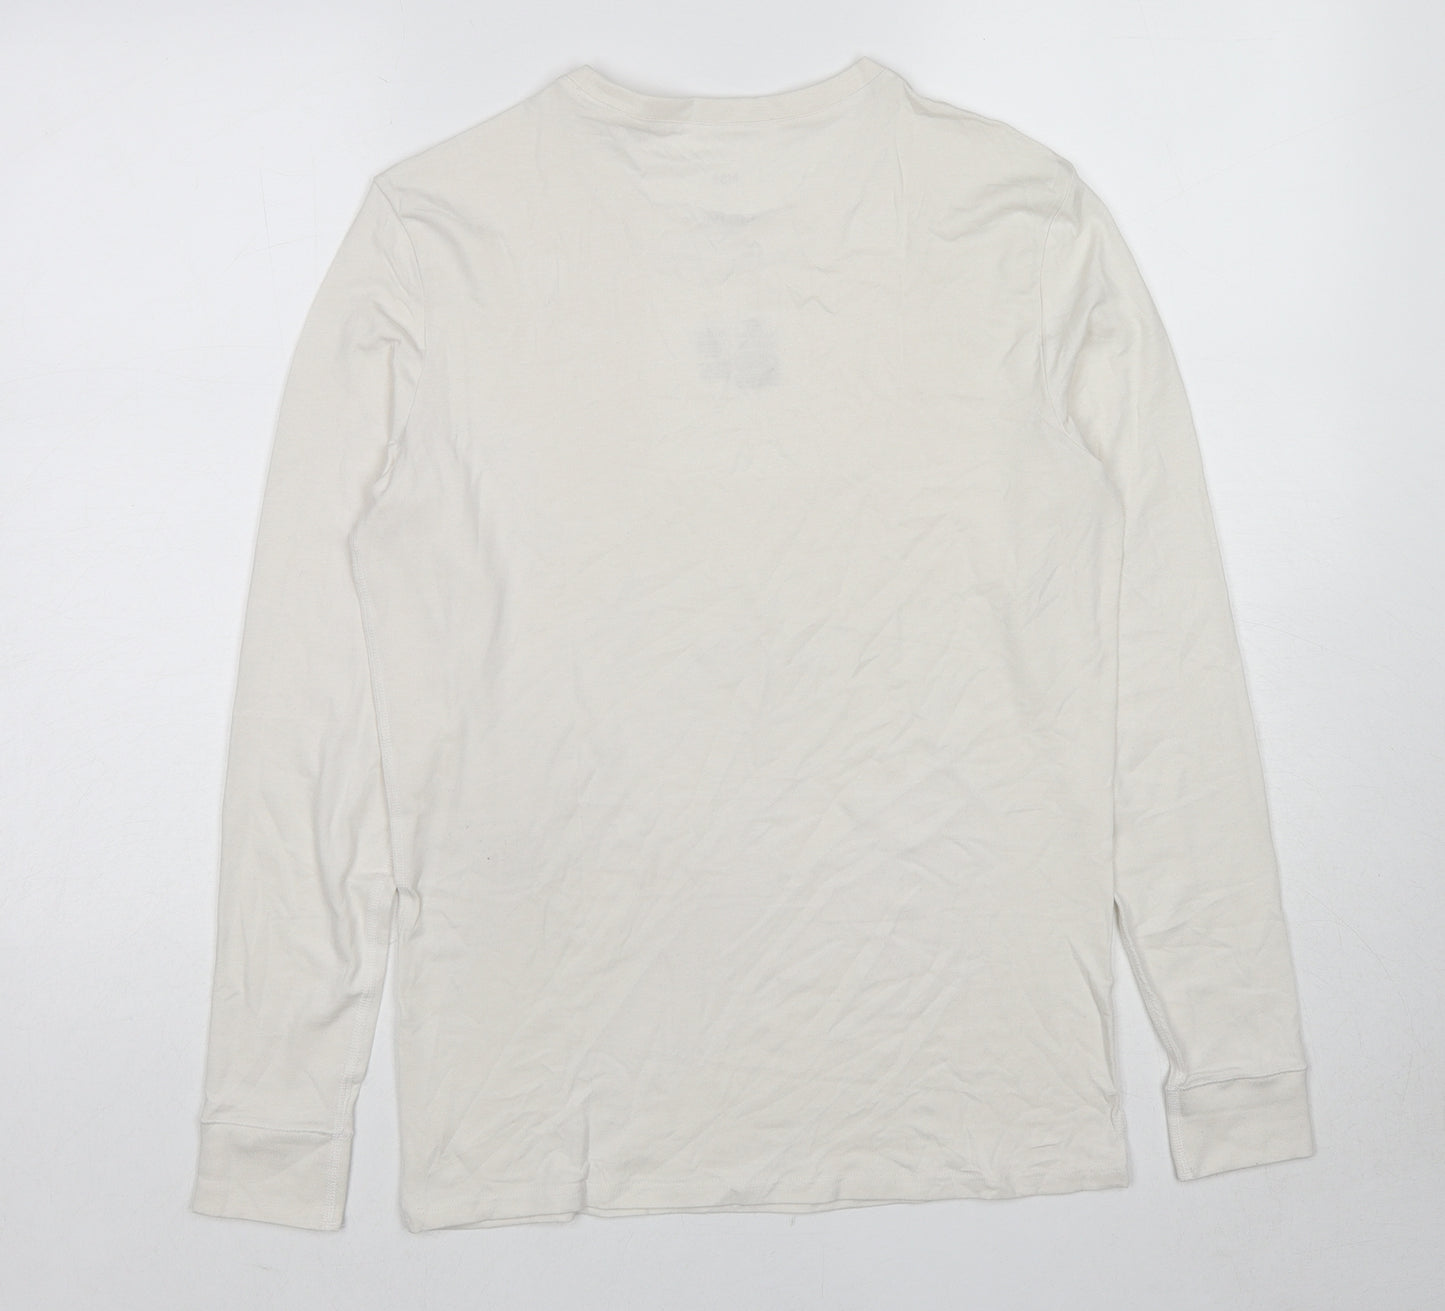 Marks and Spencer Mens White Cotton T-Shirt Size S Round Neck - Thermal